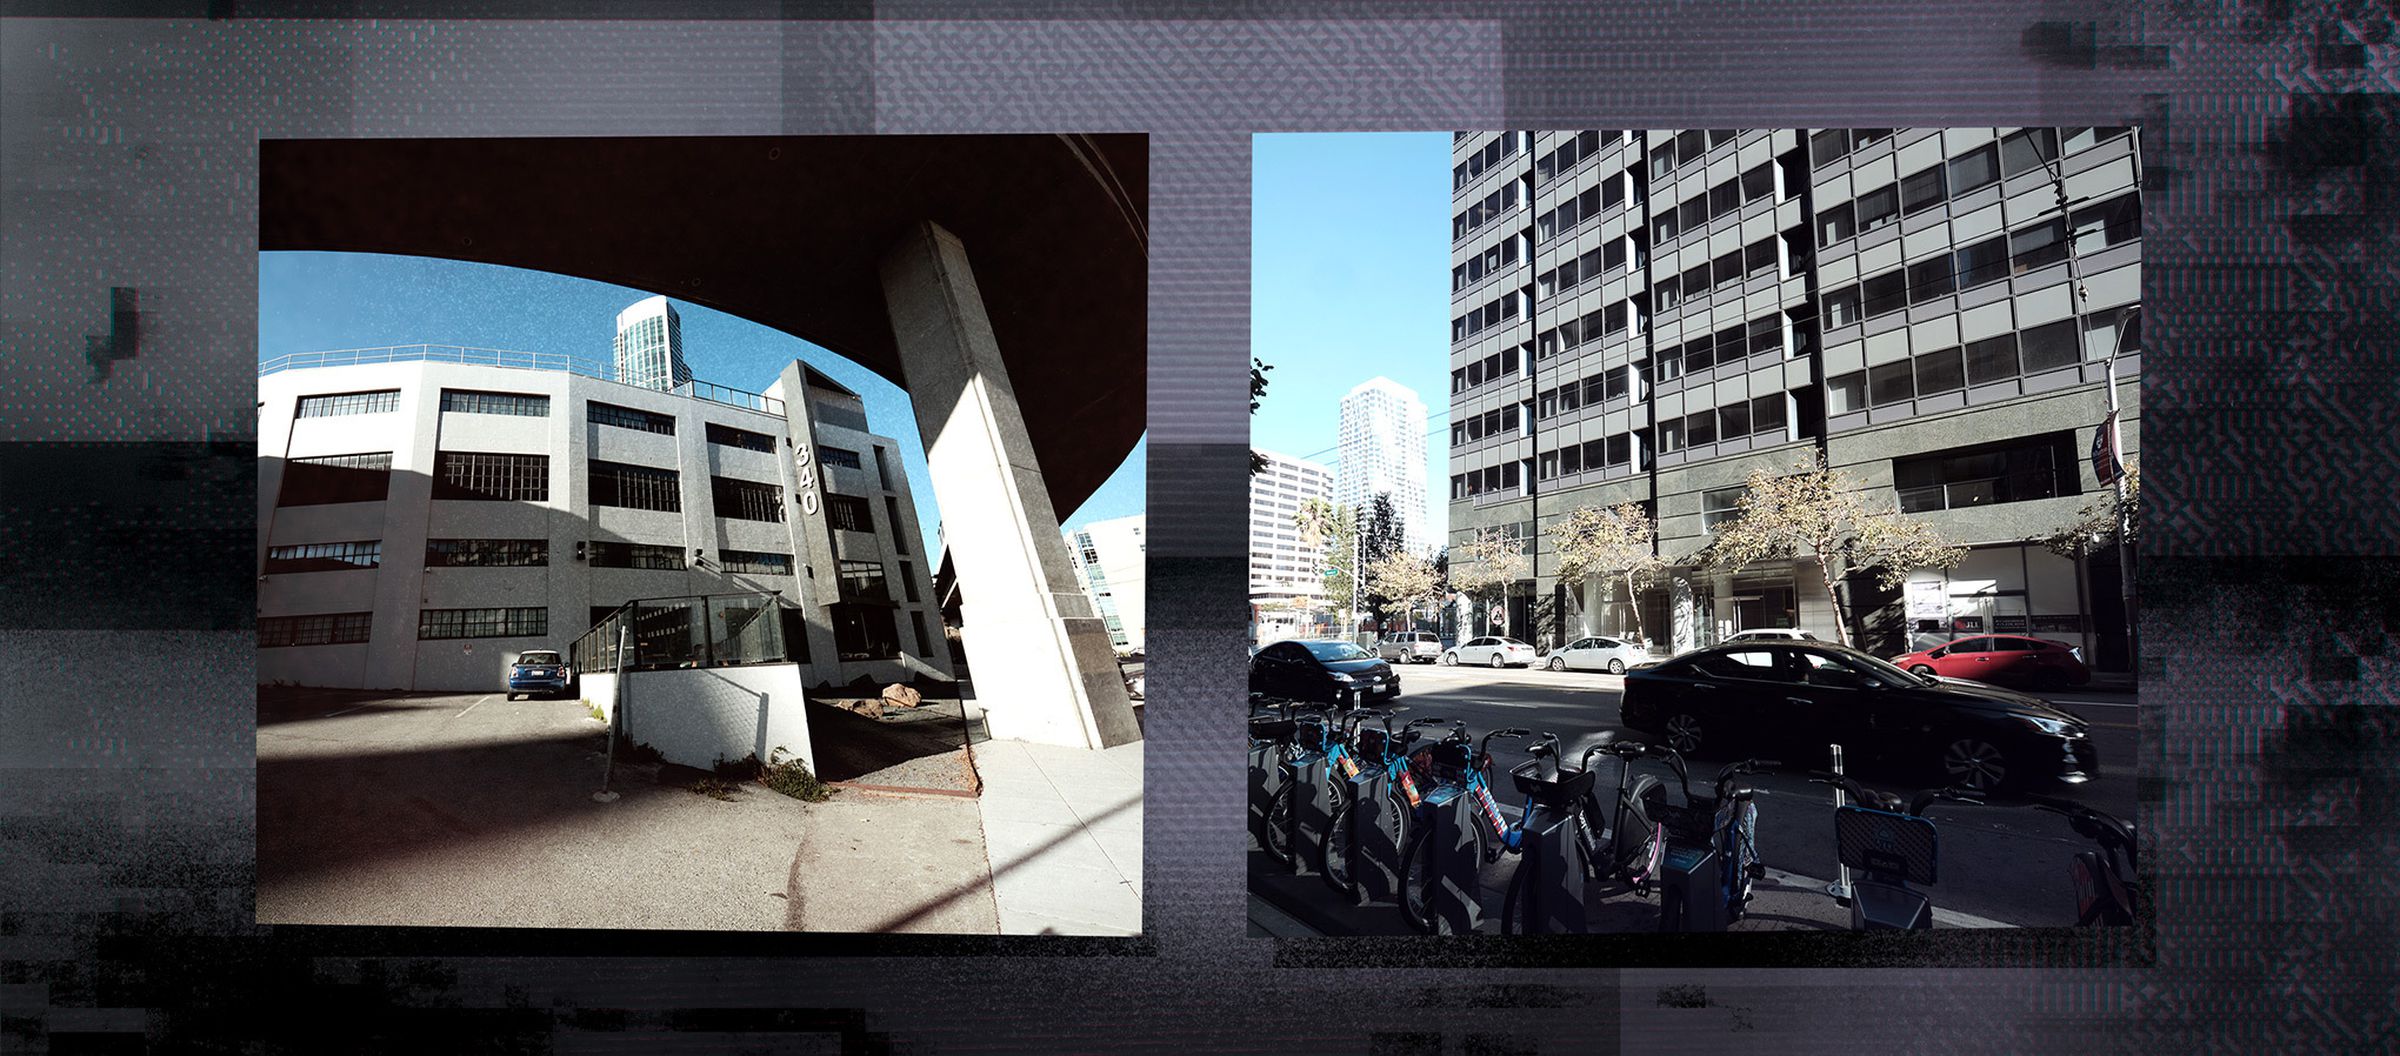 BitTorrent’s old office (left) and BitTorrent’s new office (right). 